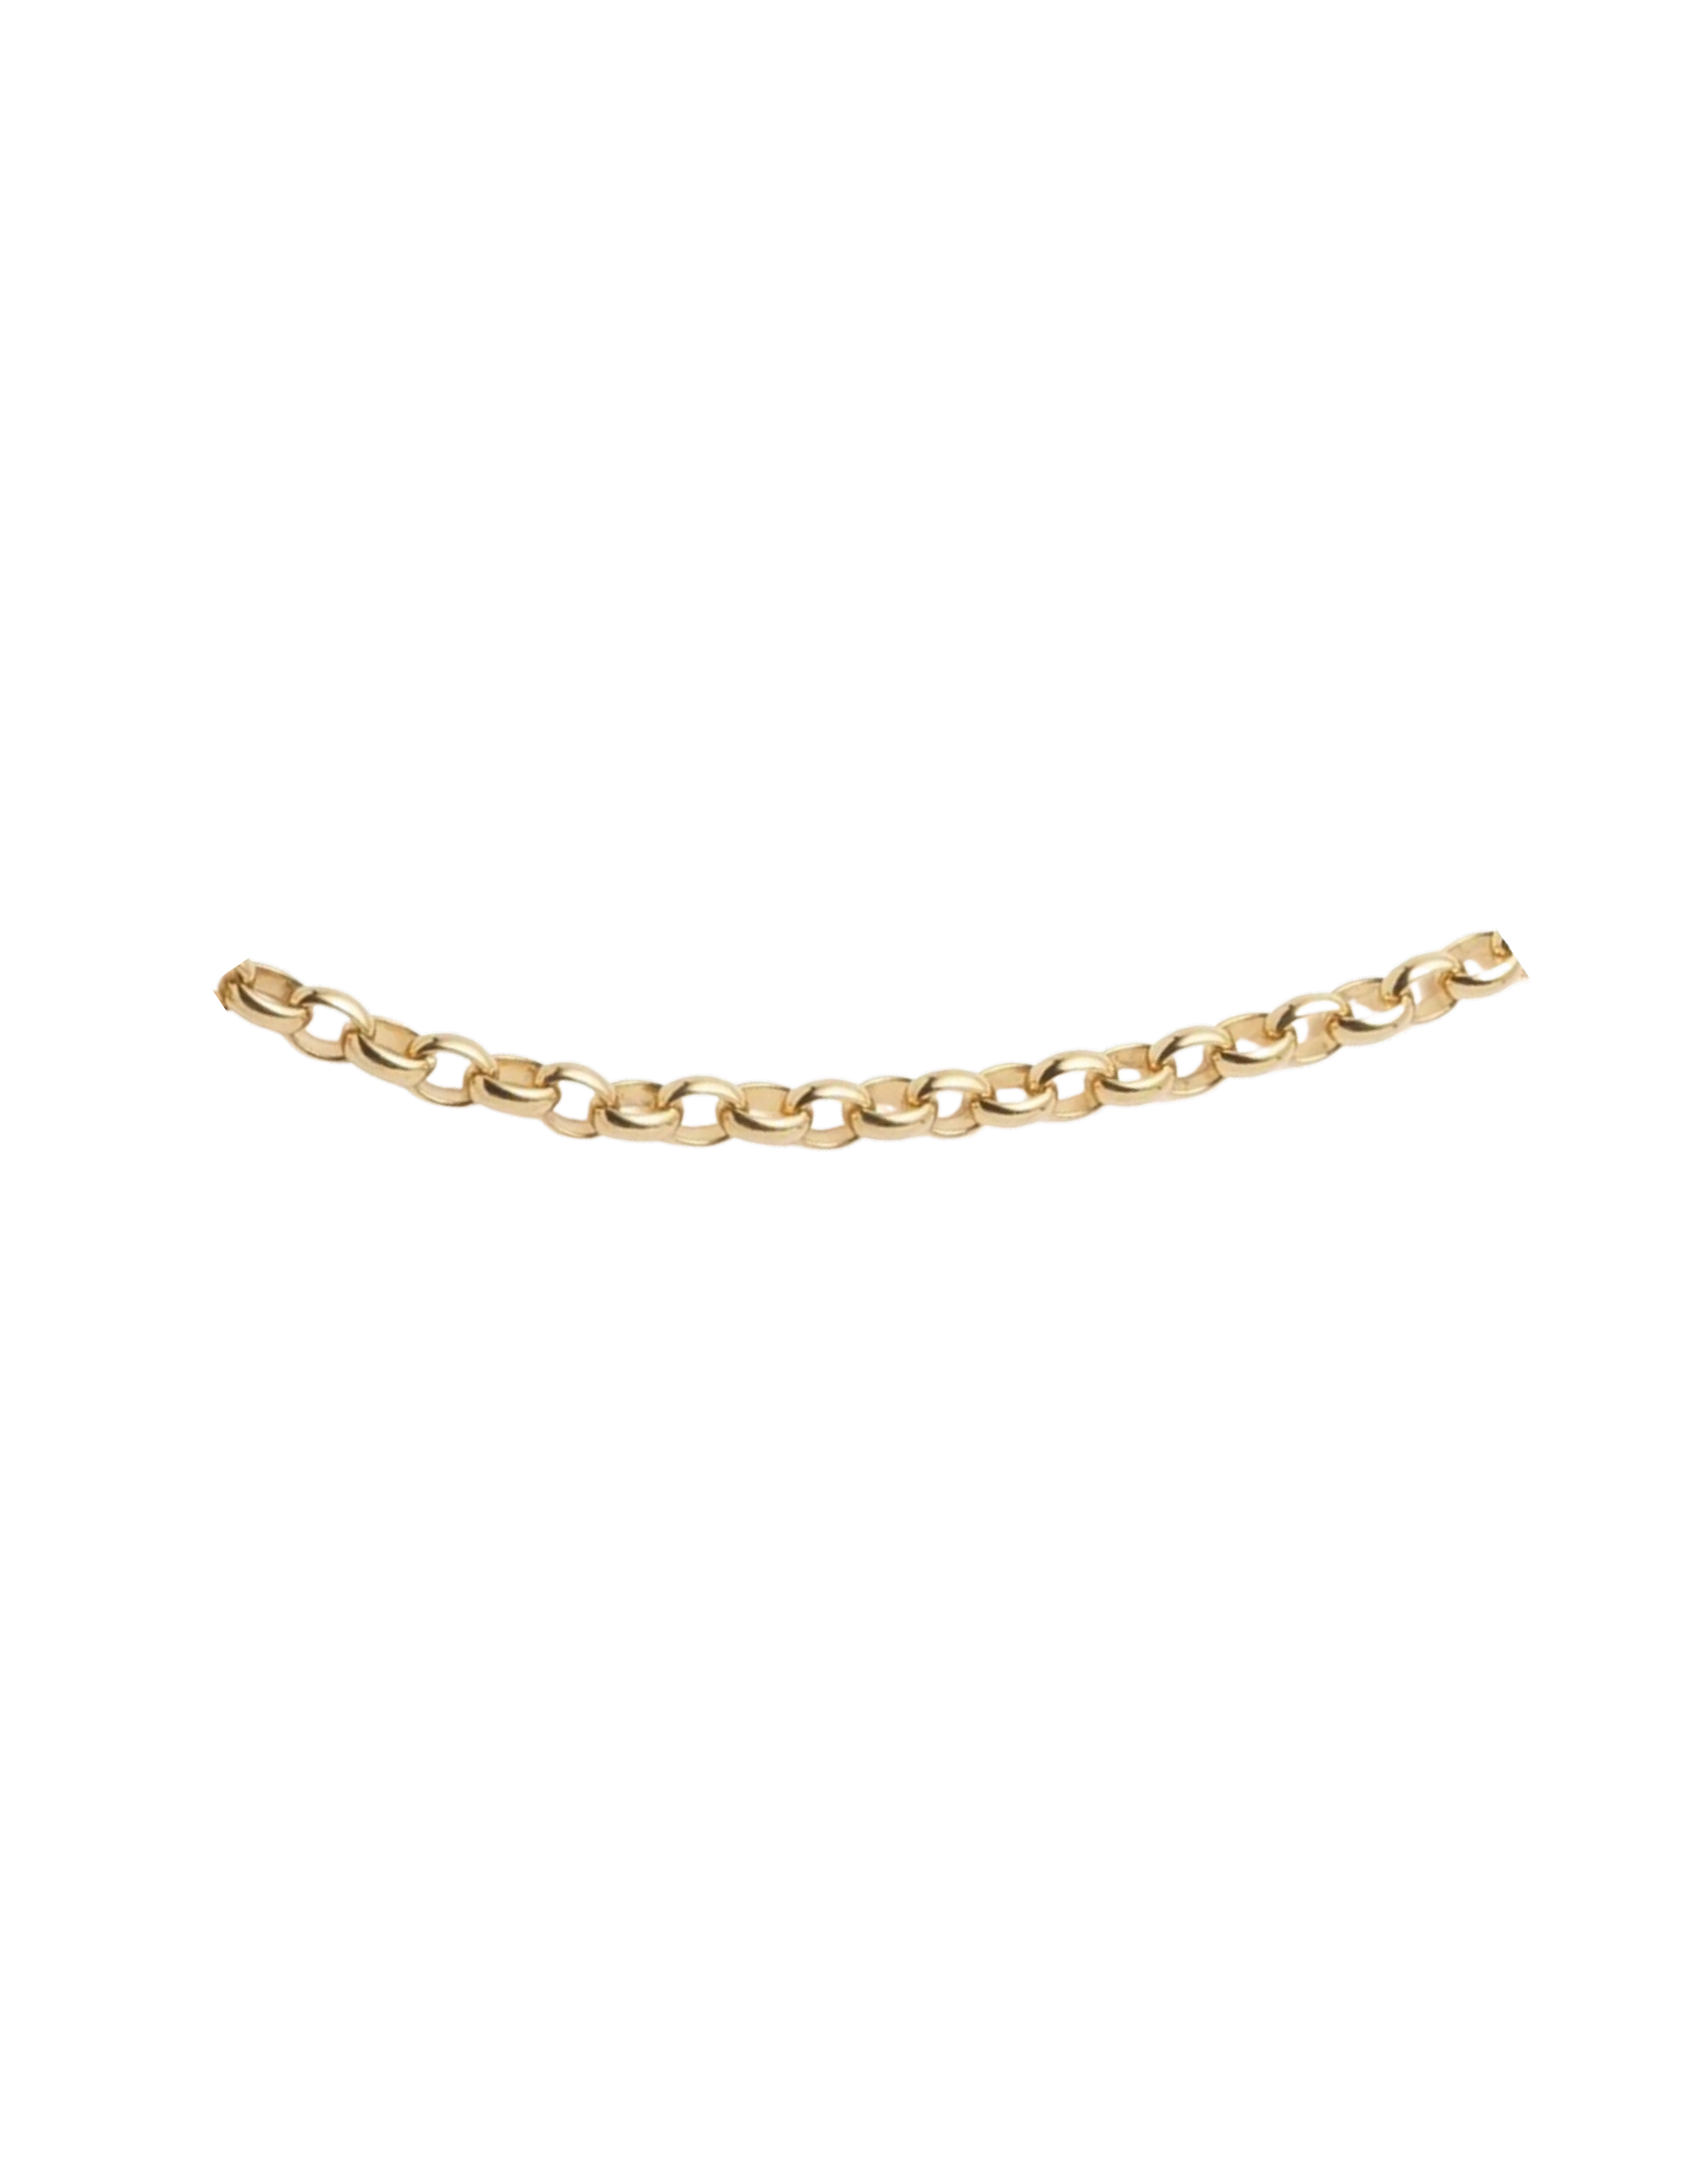 Anklet Padlock and Oval Belcher Chain in 9ct Gold — The Jewel Shop